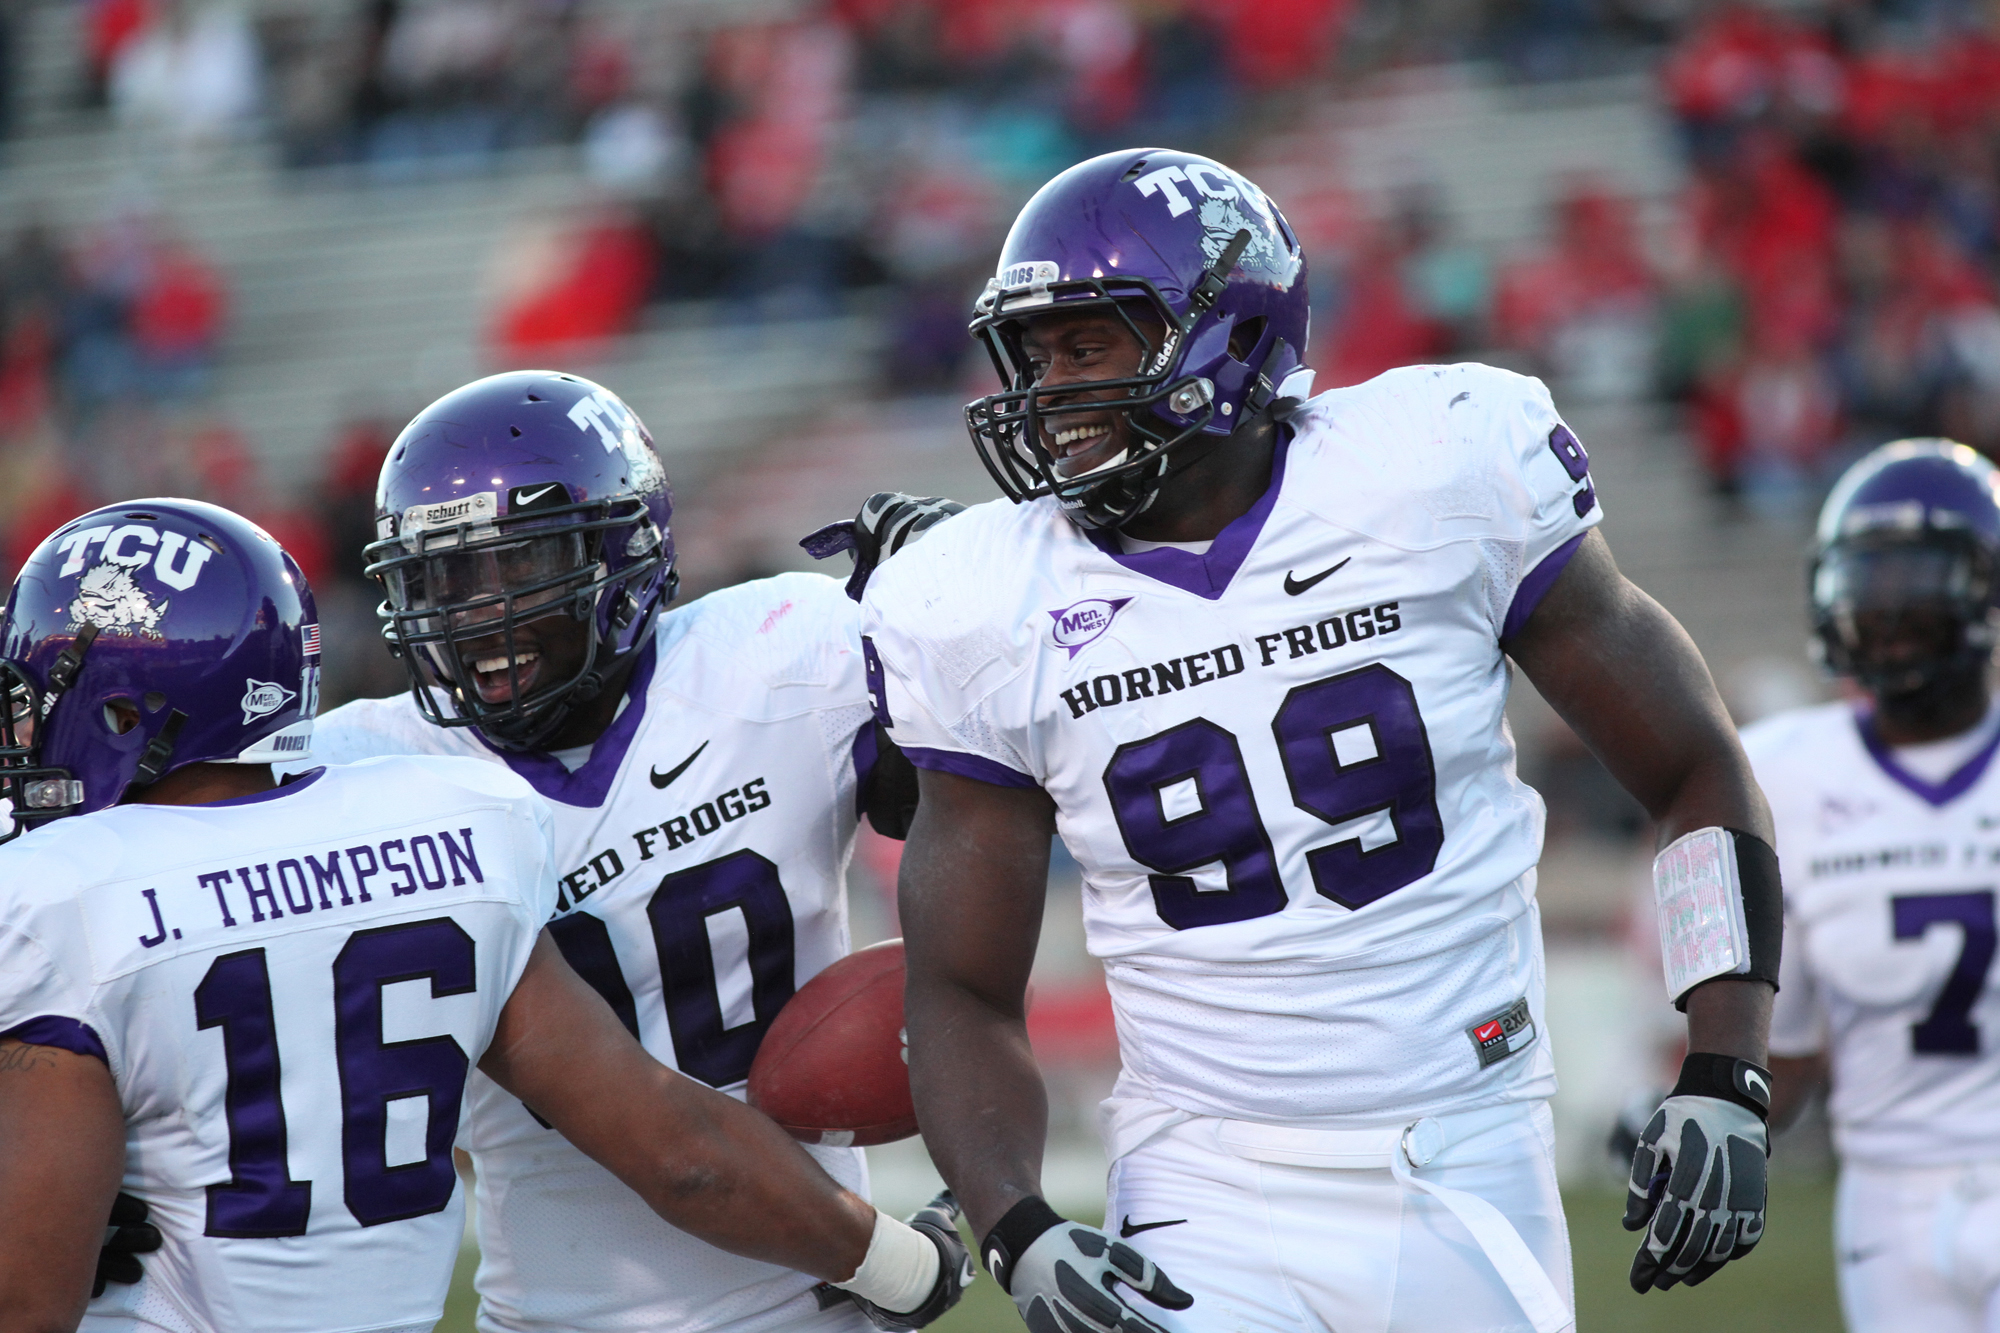 ALBUQUERQUE, NM - NOVEMBER 27: Braylon Broughton #99, Stansly Maponga #90 (C) and Jurell Thompson #16 of the TCU Horned Frogs celebrate after a touchdown against the University of New Mexico Lobos on November 27, 2010 at University Stadium in Albuquerque,